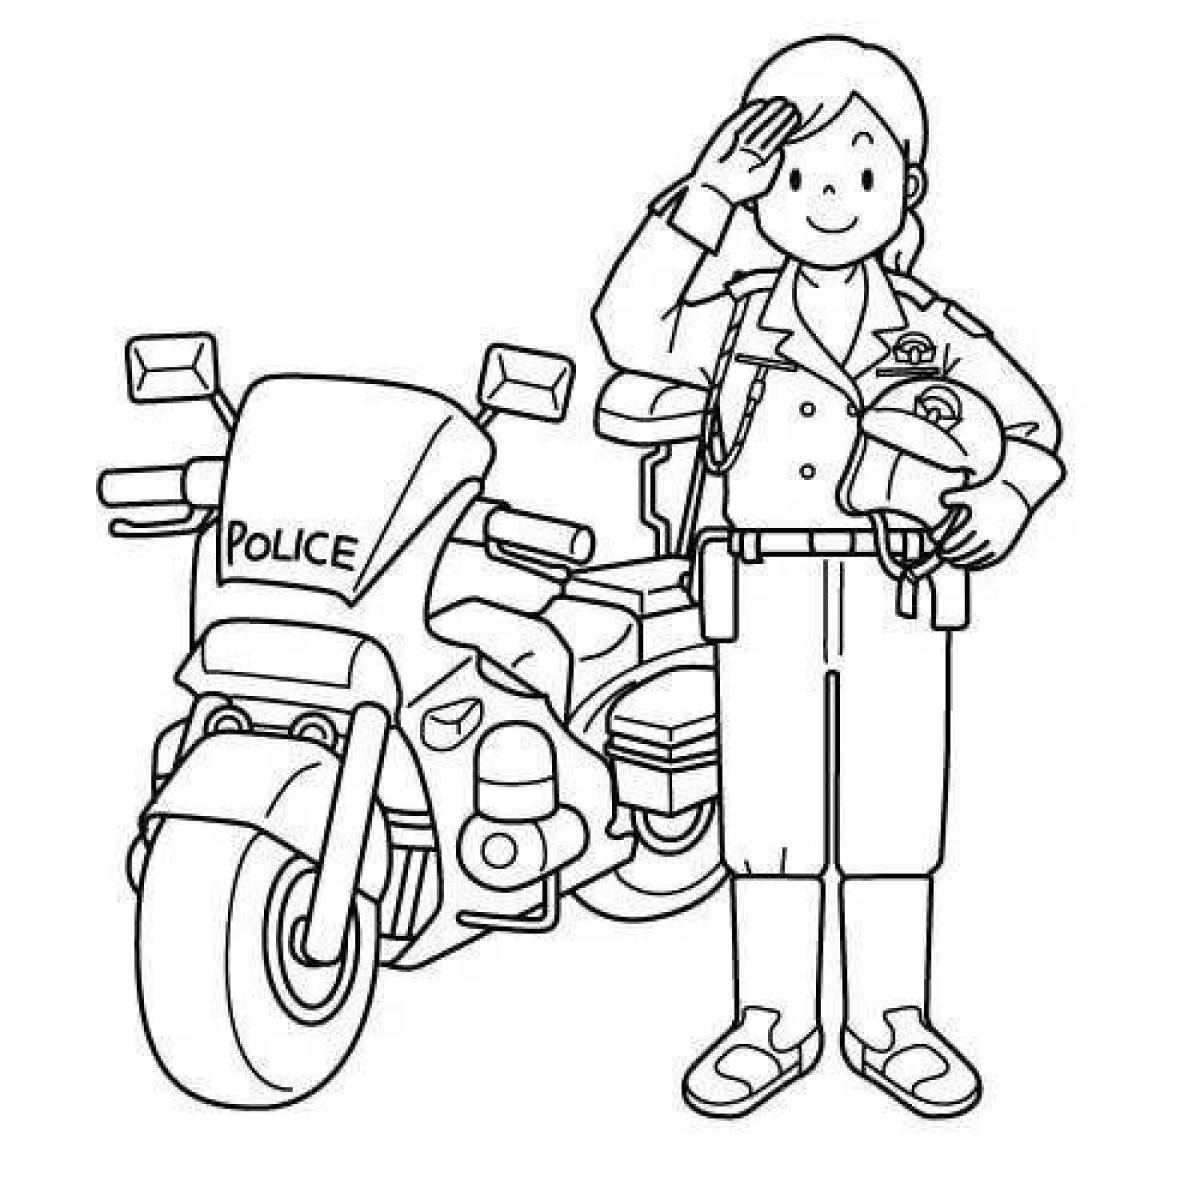 Colorful coloring book transport profession for children 5-6 years old